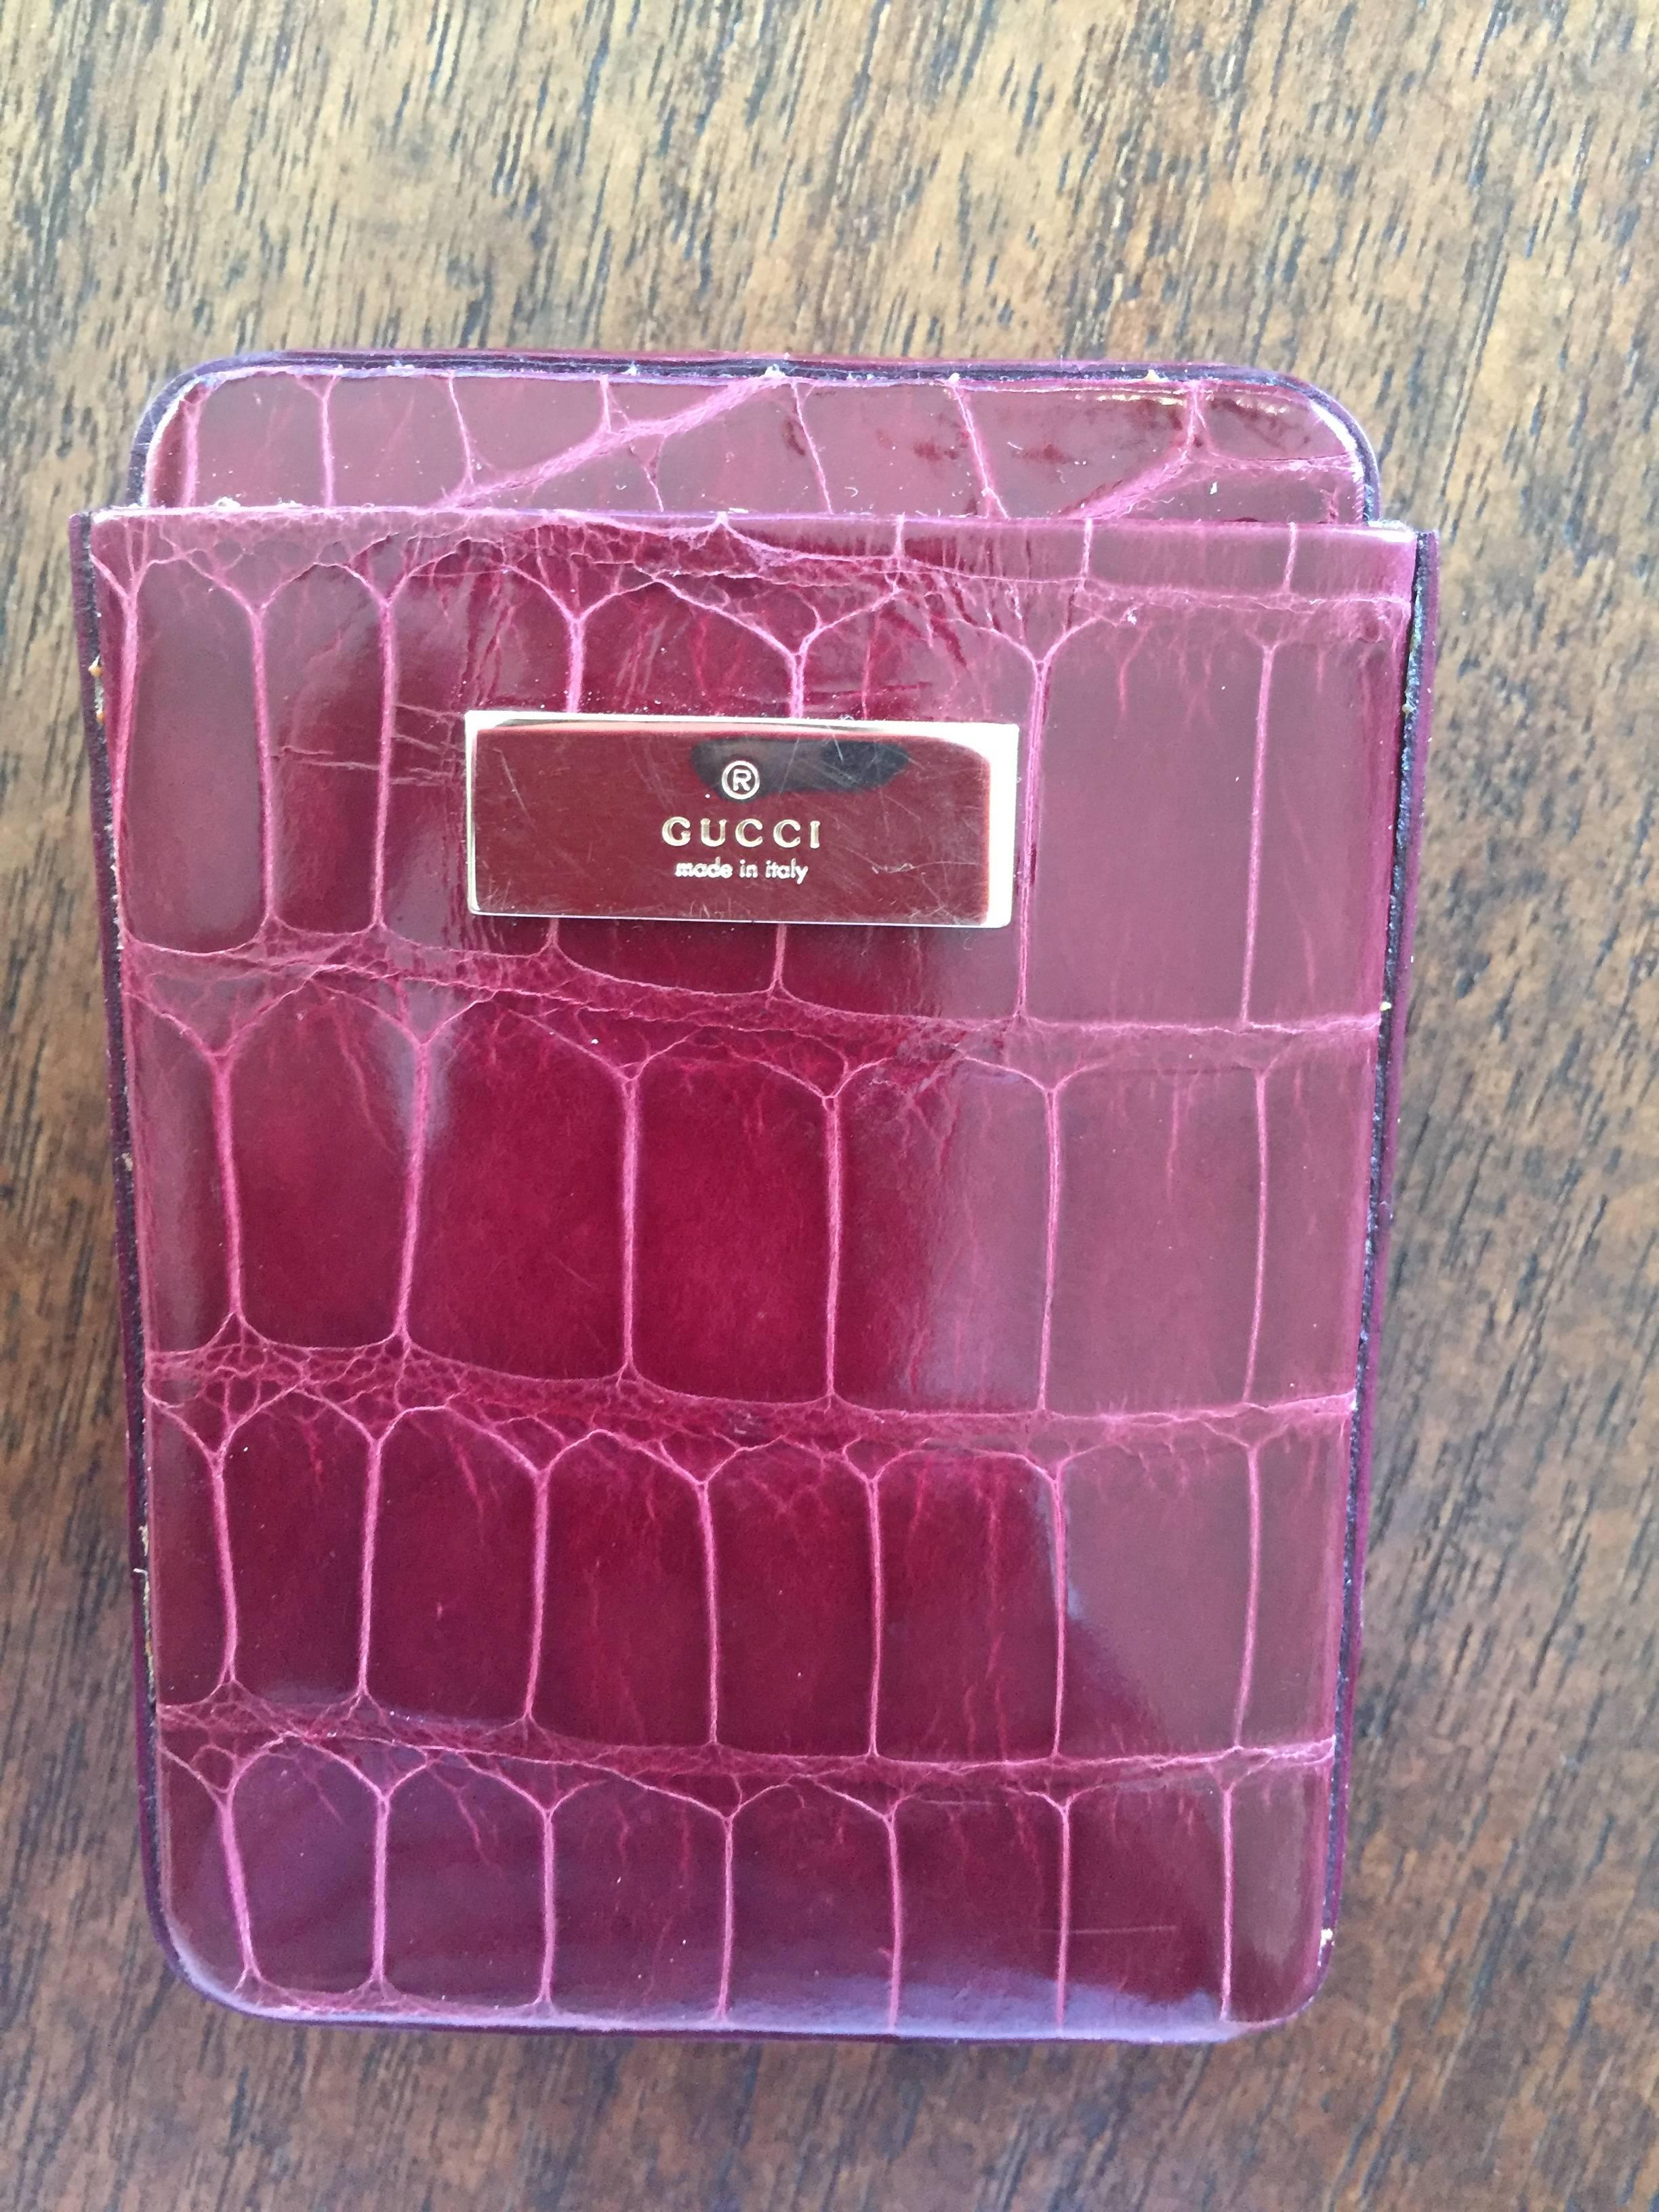 Tom Ford Era Gucci Red Alligator Cigarette Case In Excellent Condition For Sale In Cloverdale, CA